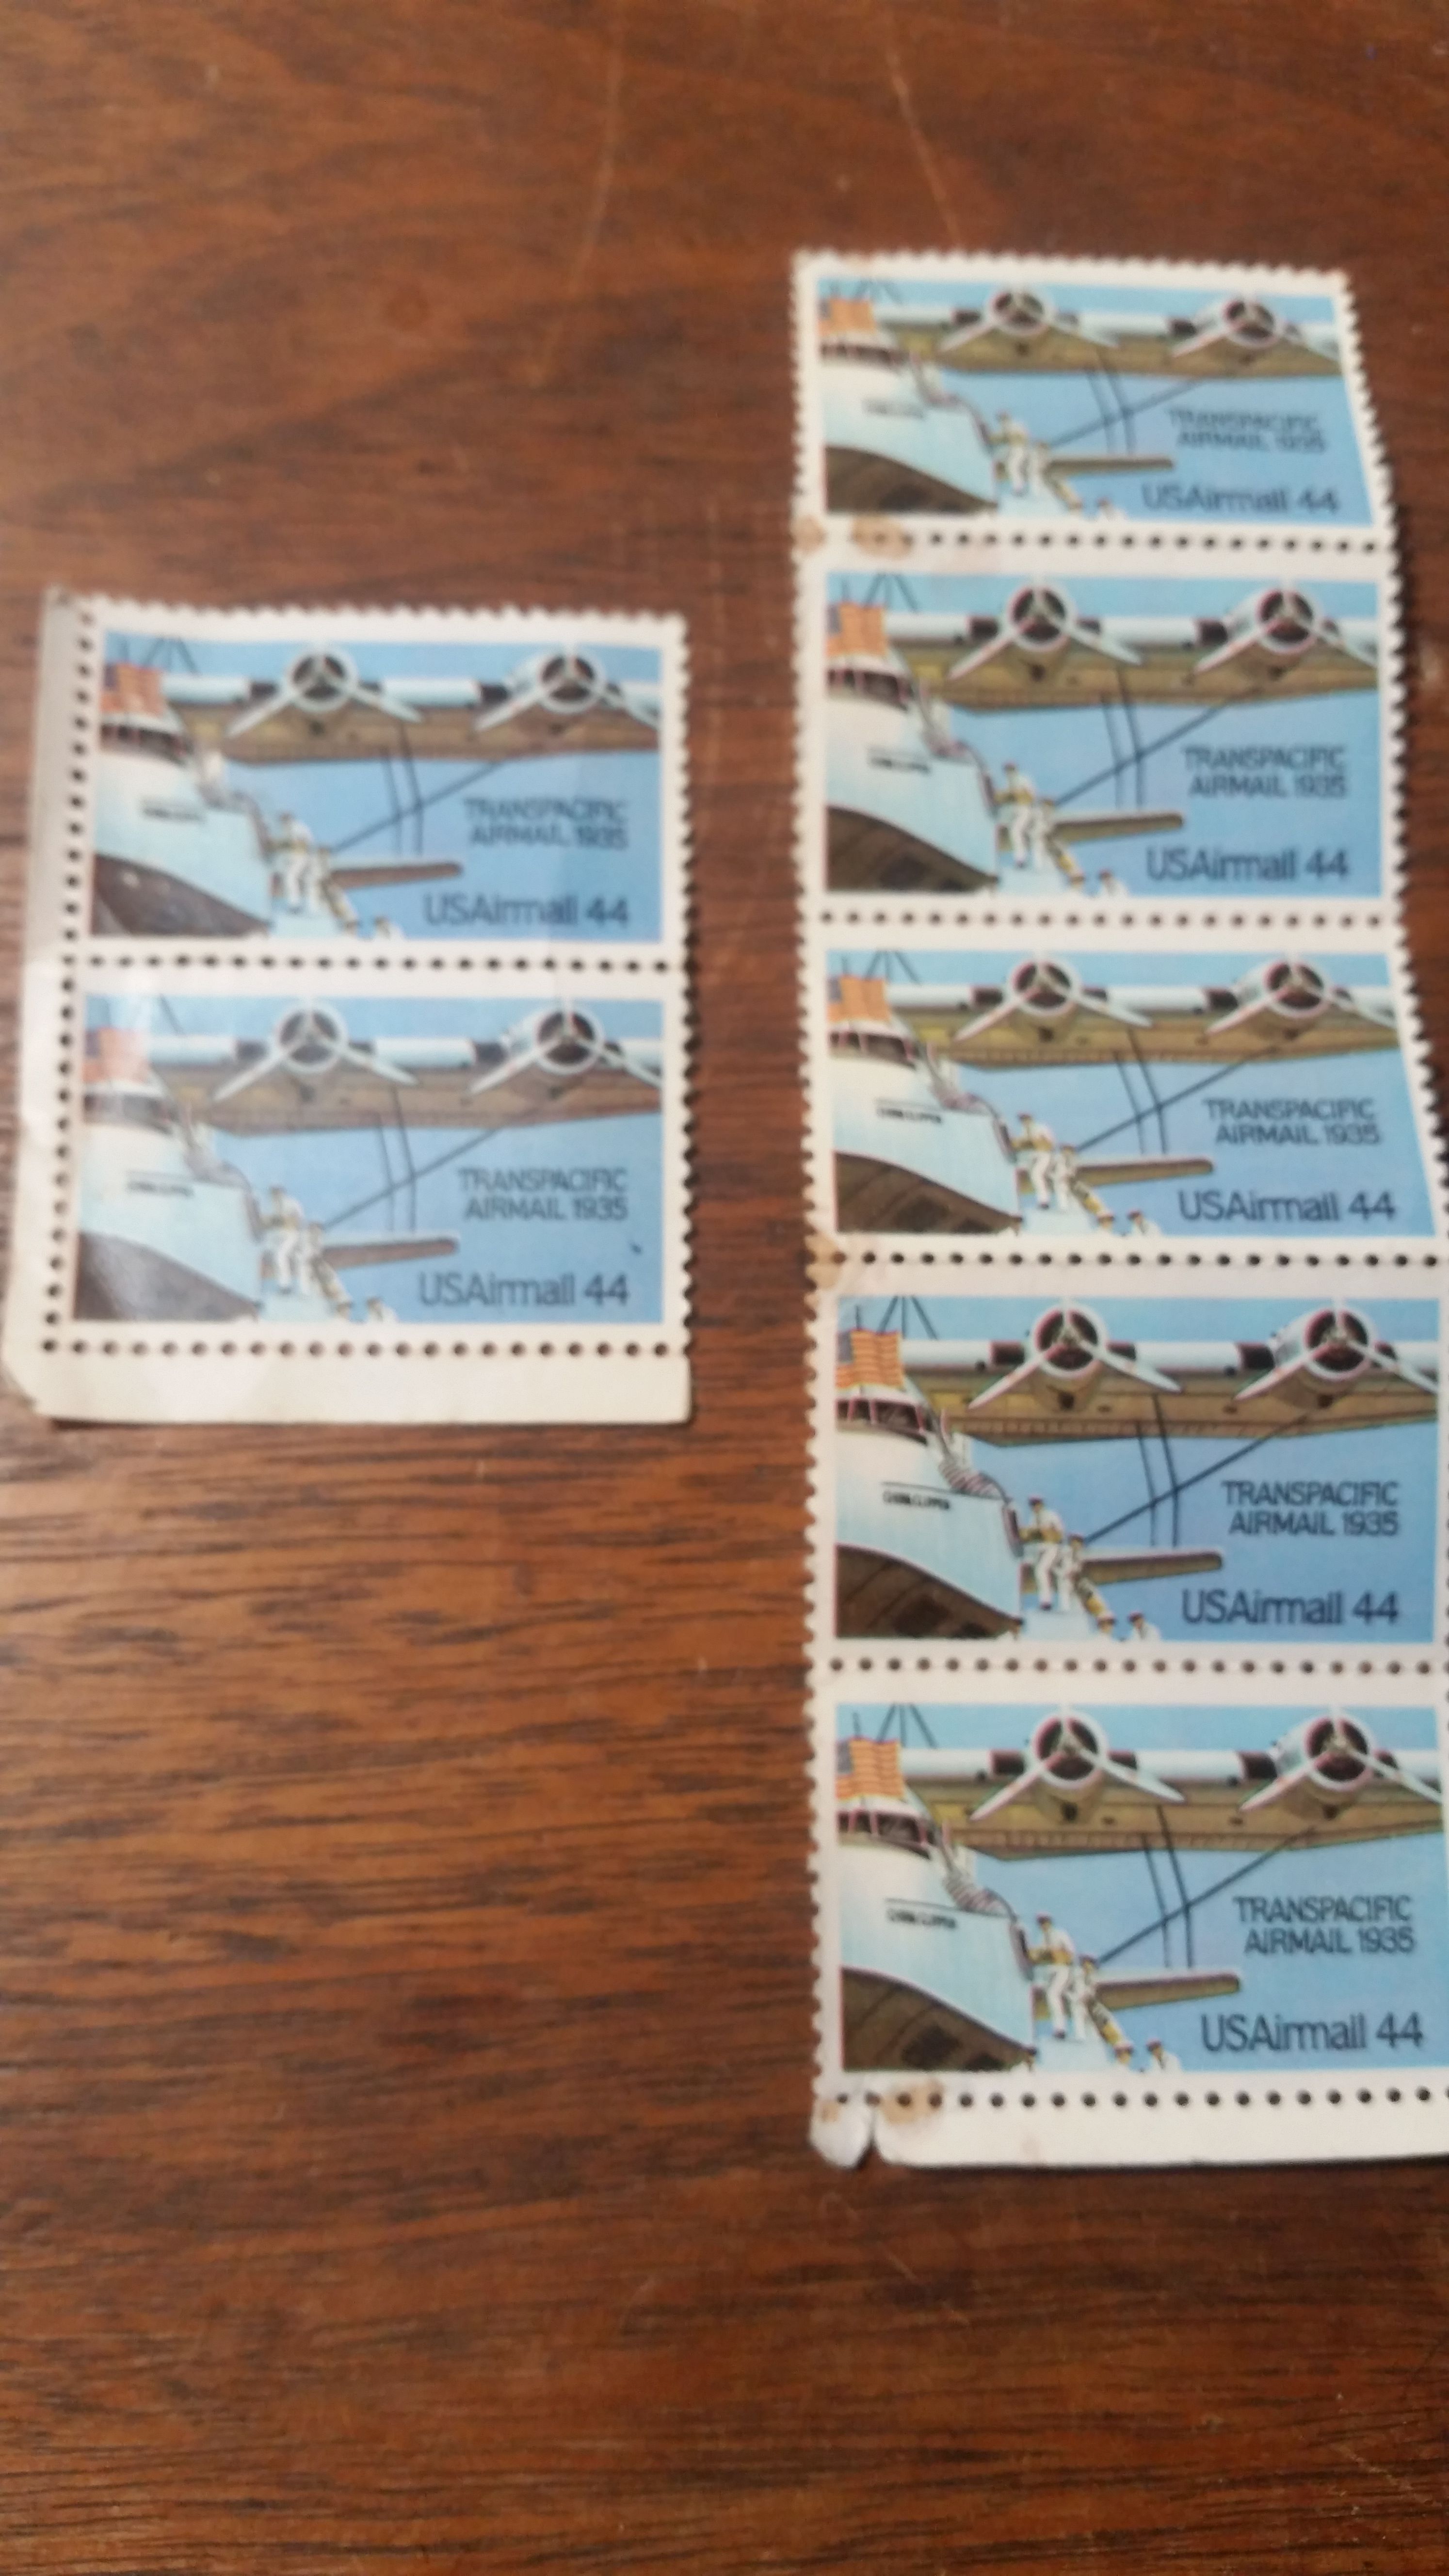 US Airmail 44 1985 stamp